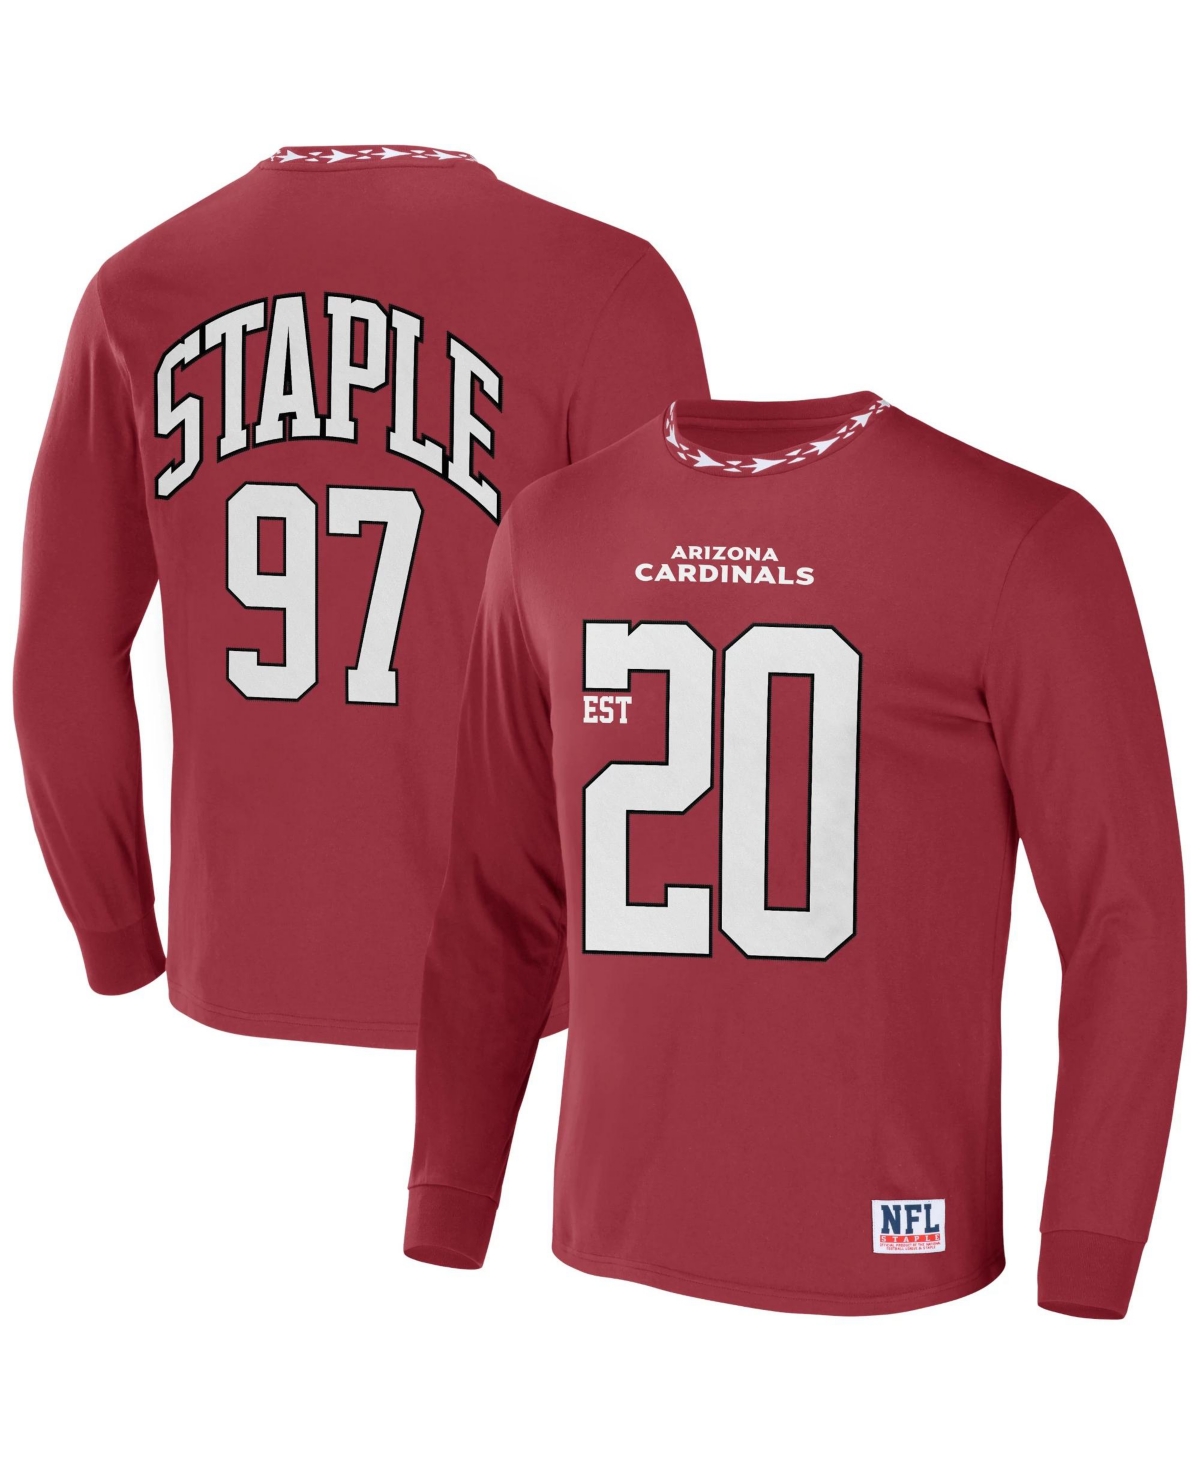 Men's Nfl X Staple Red Arizona Cardinals Core Long Sleeve Jersey Style T-shirt - Red